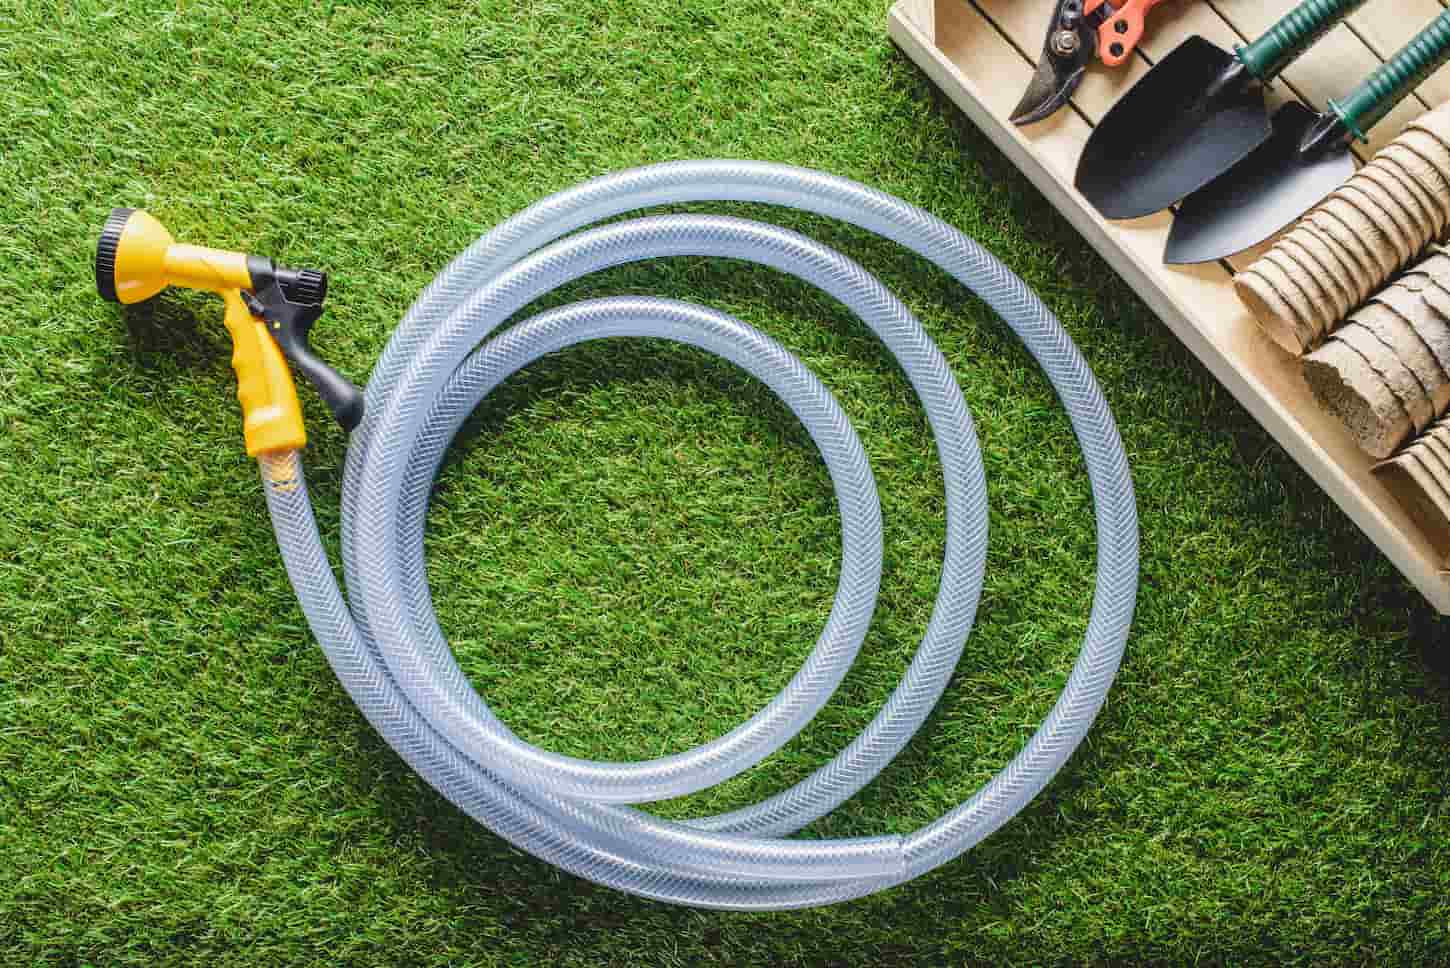 A top-view image of a garden hose on a grass floor background.